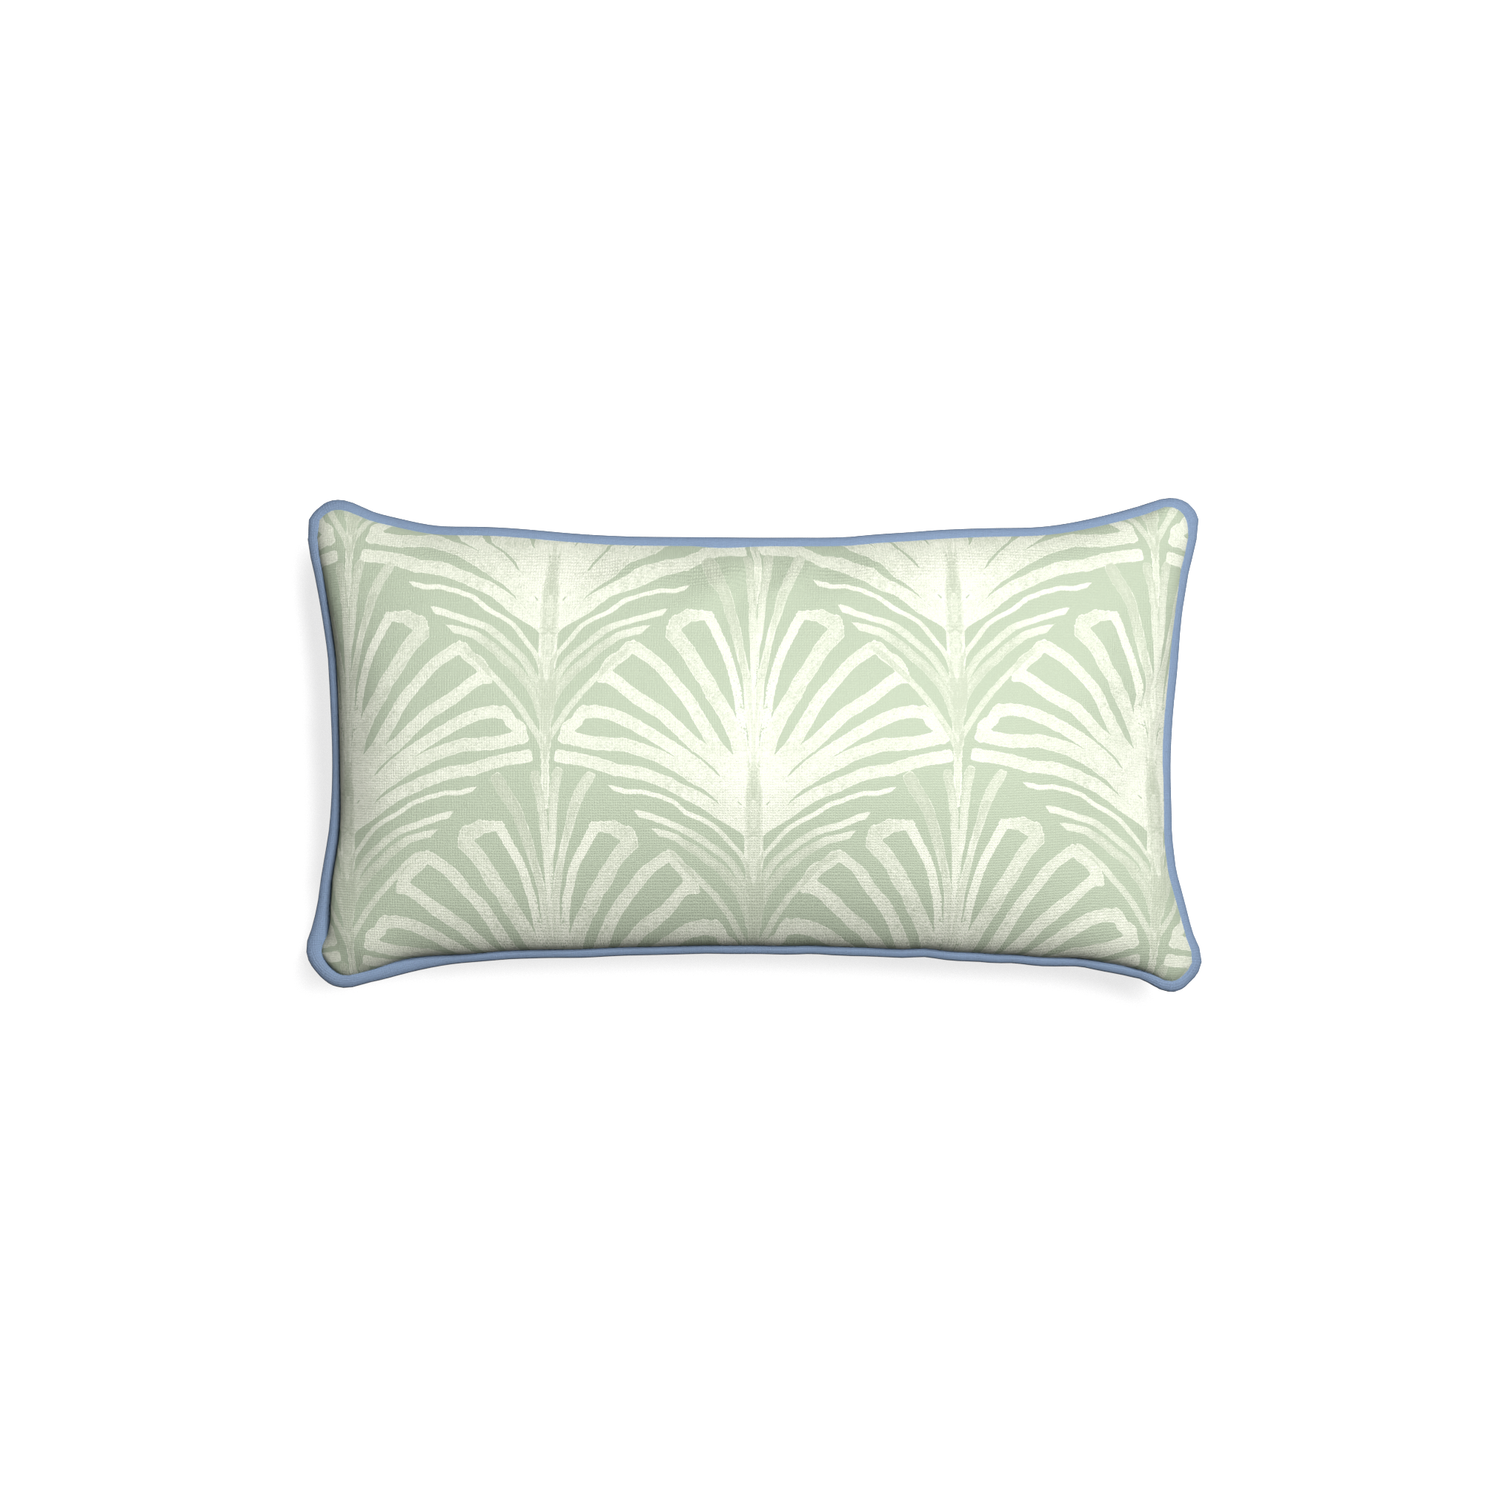 Petite-lumbar suzy sage custom sage green palmpillow with sky piping on white background